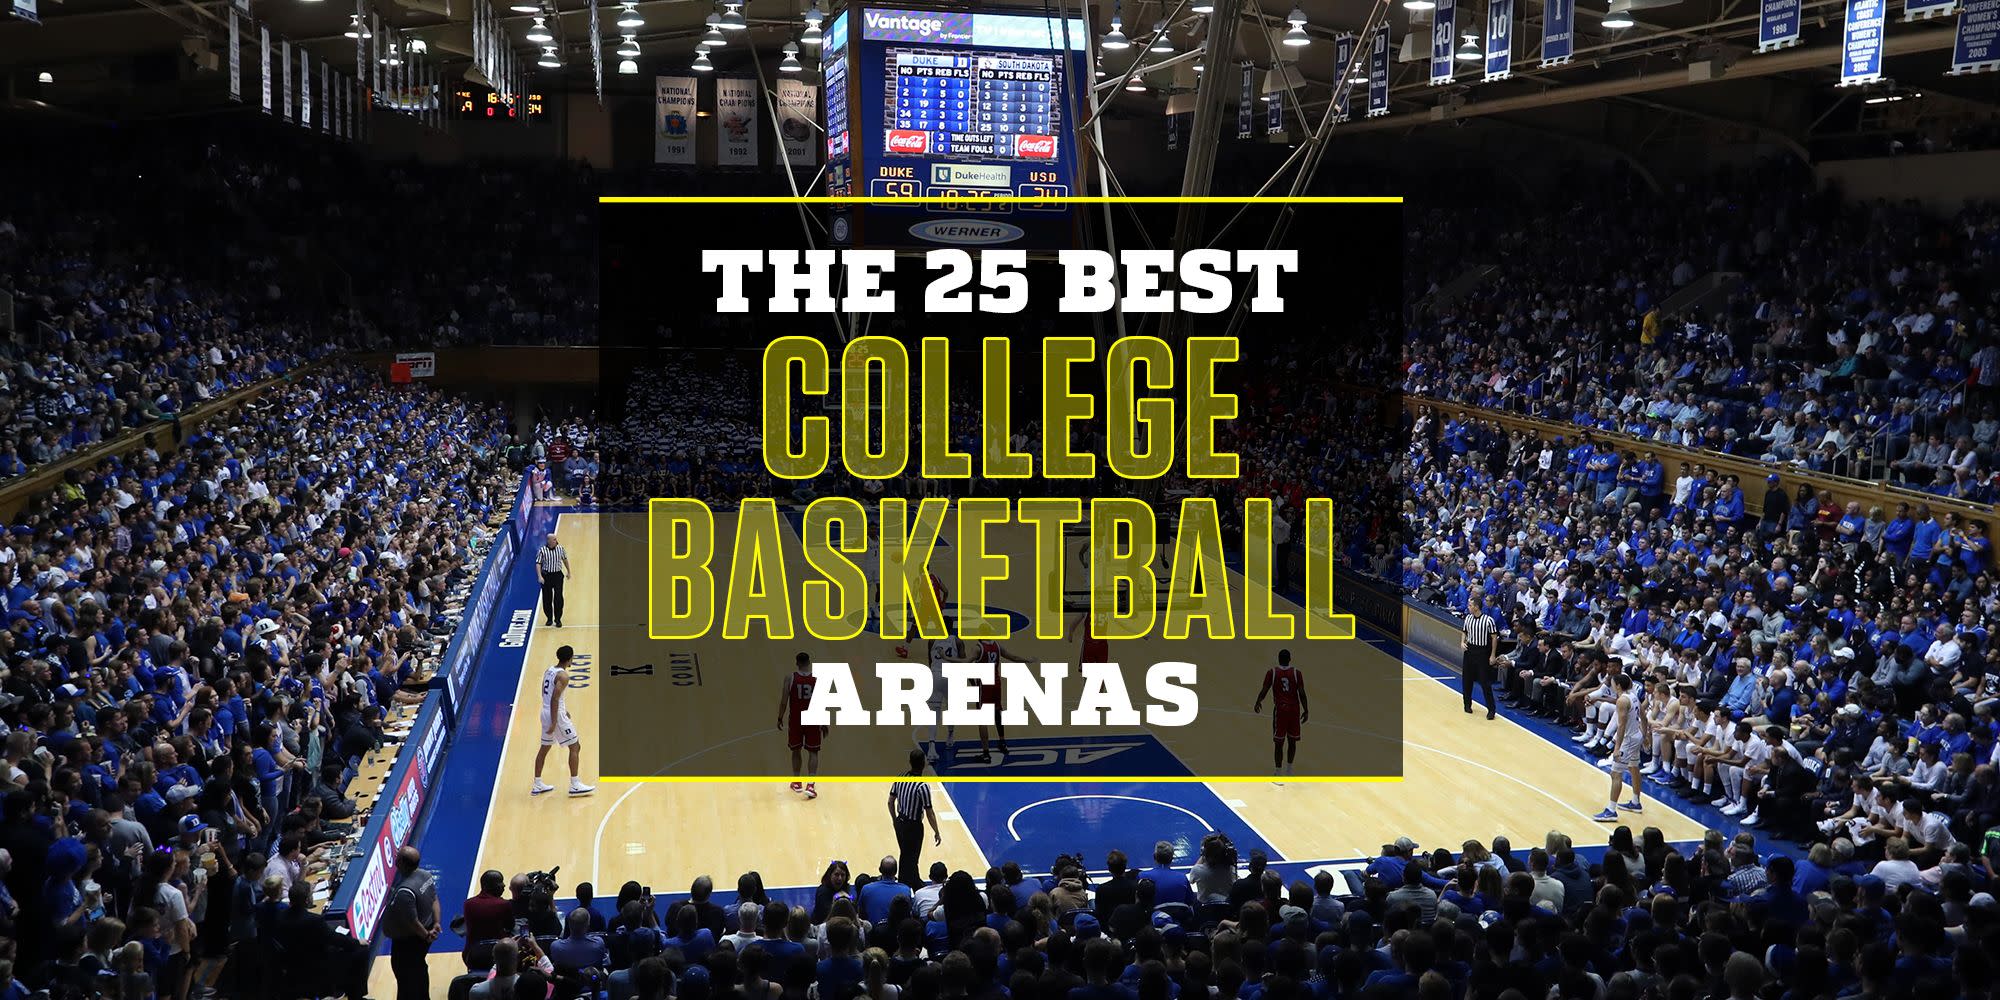 The 25 Best College Basketball Arenas